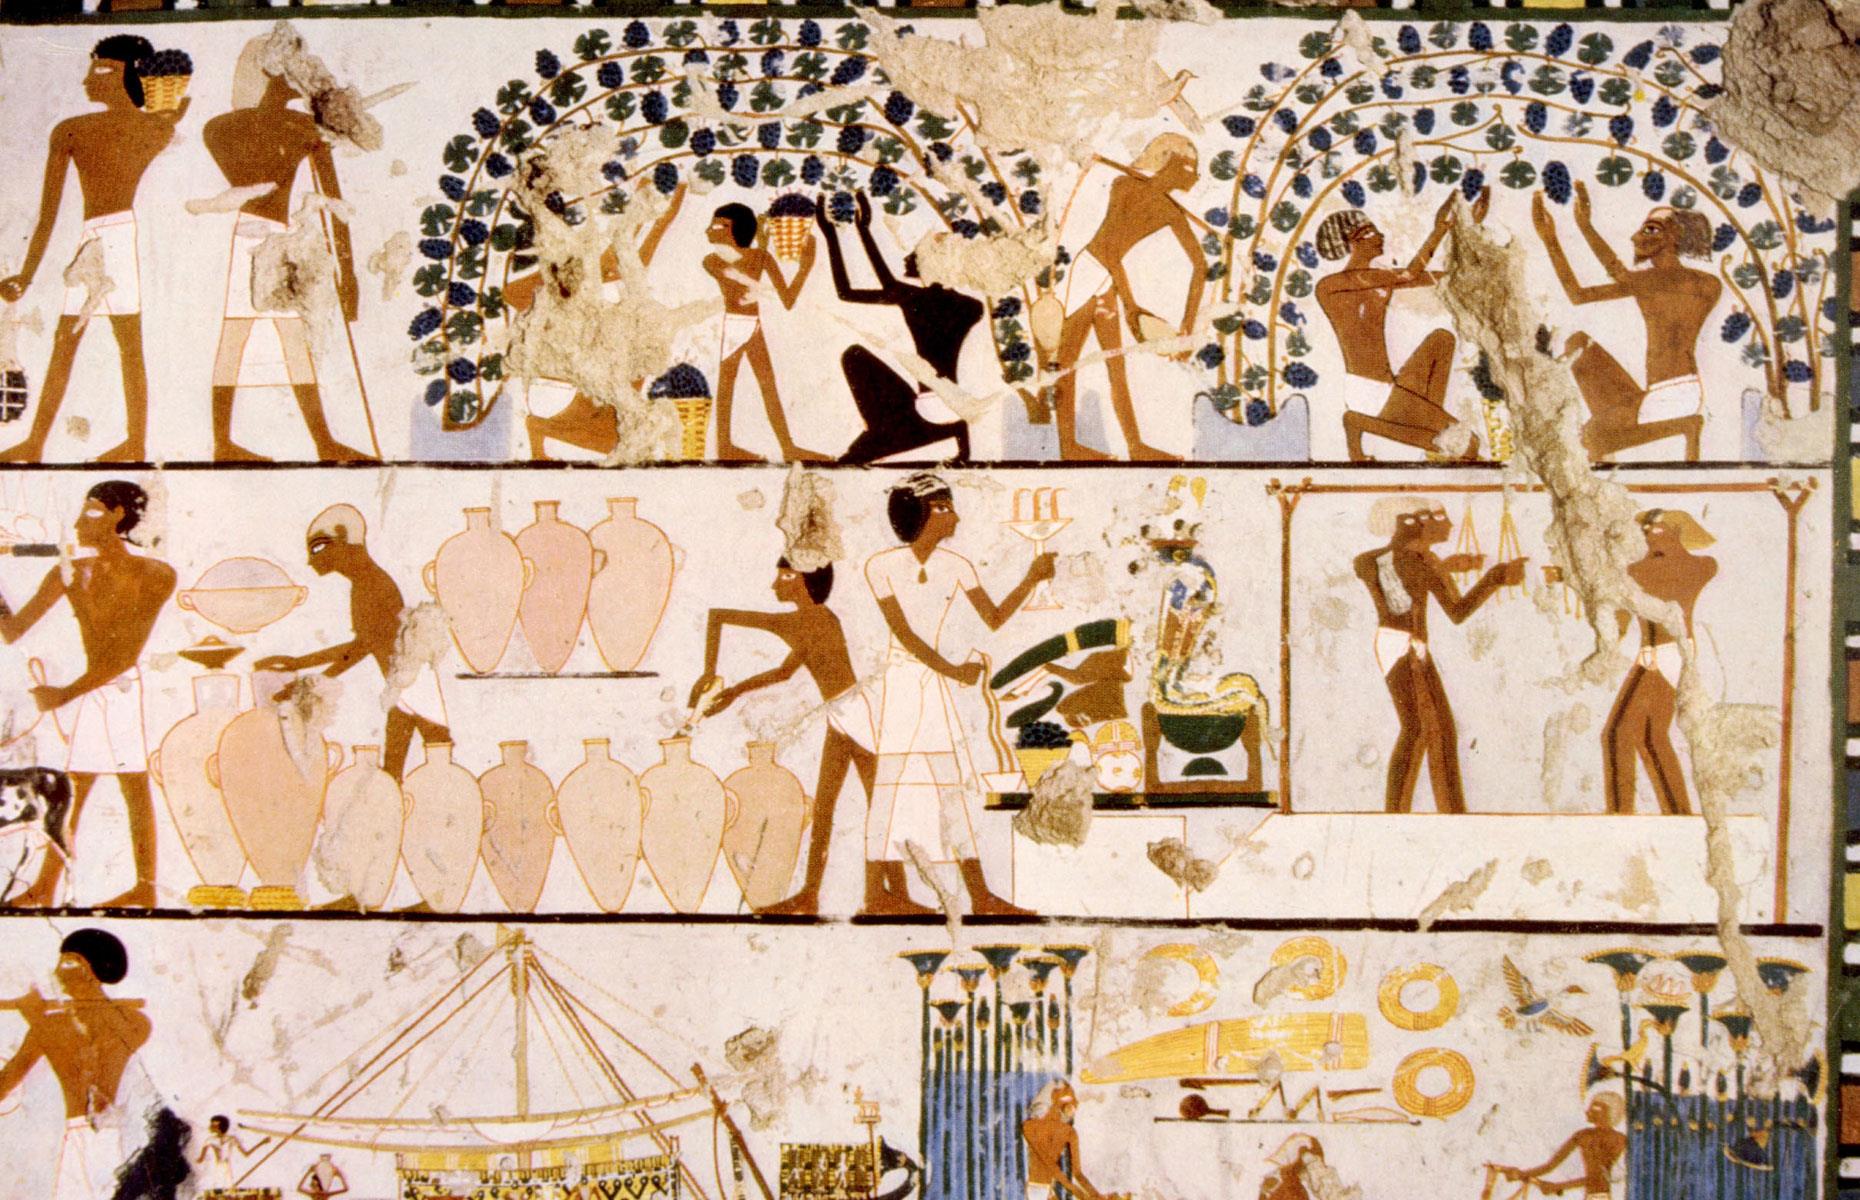 Labourer in ancient Egypt: eight hours a day, 131 days a year